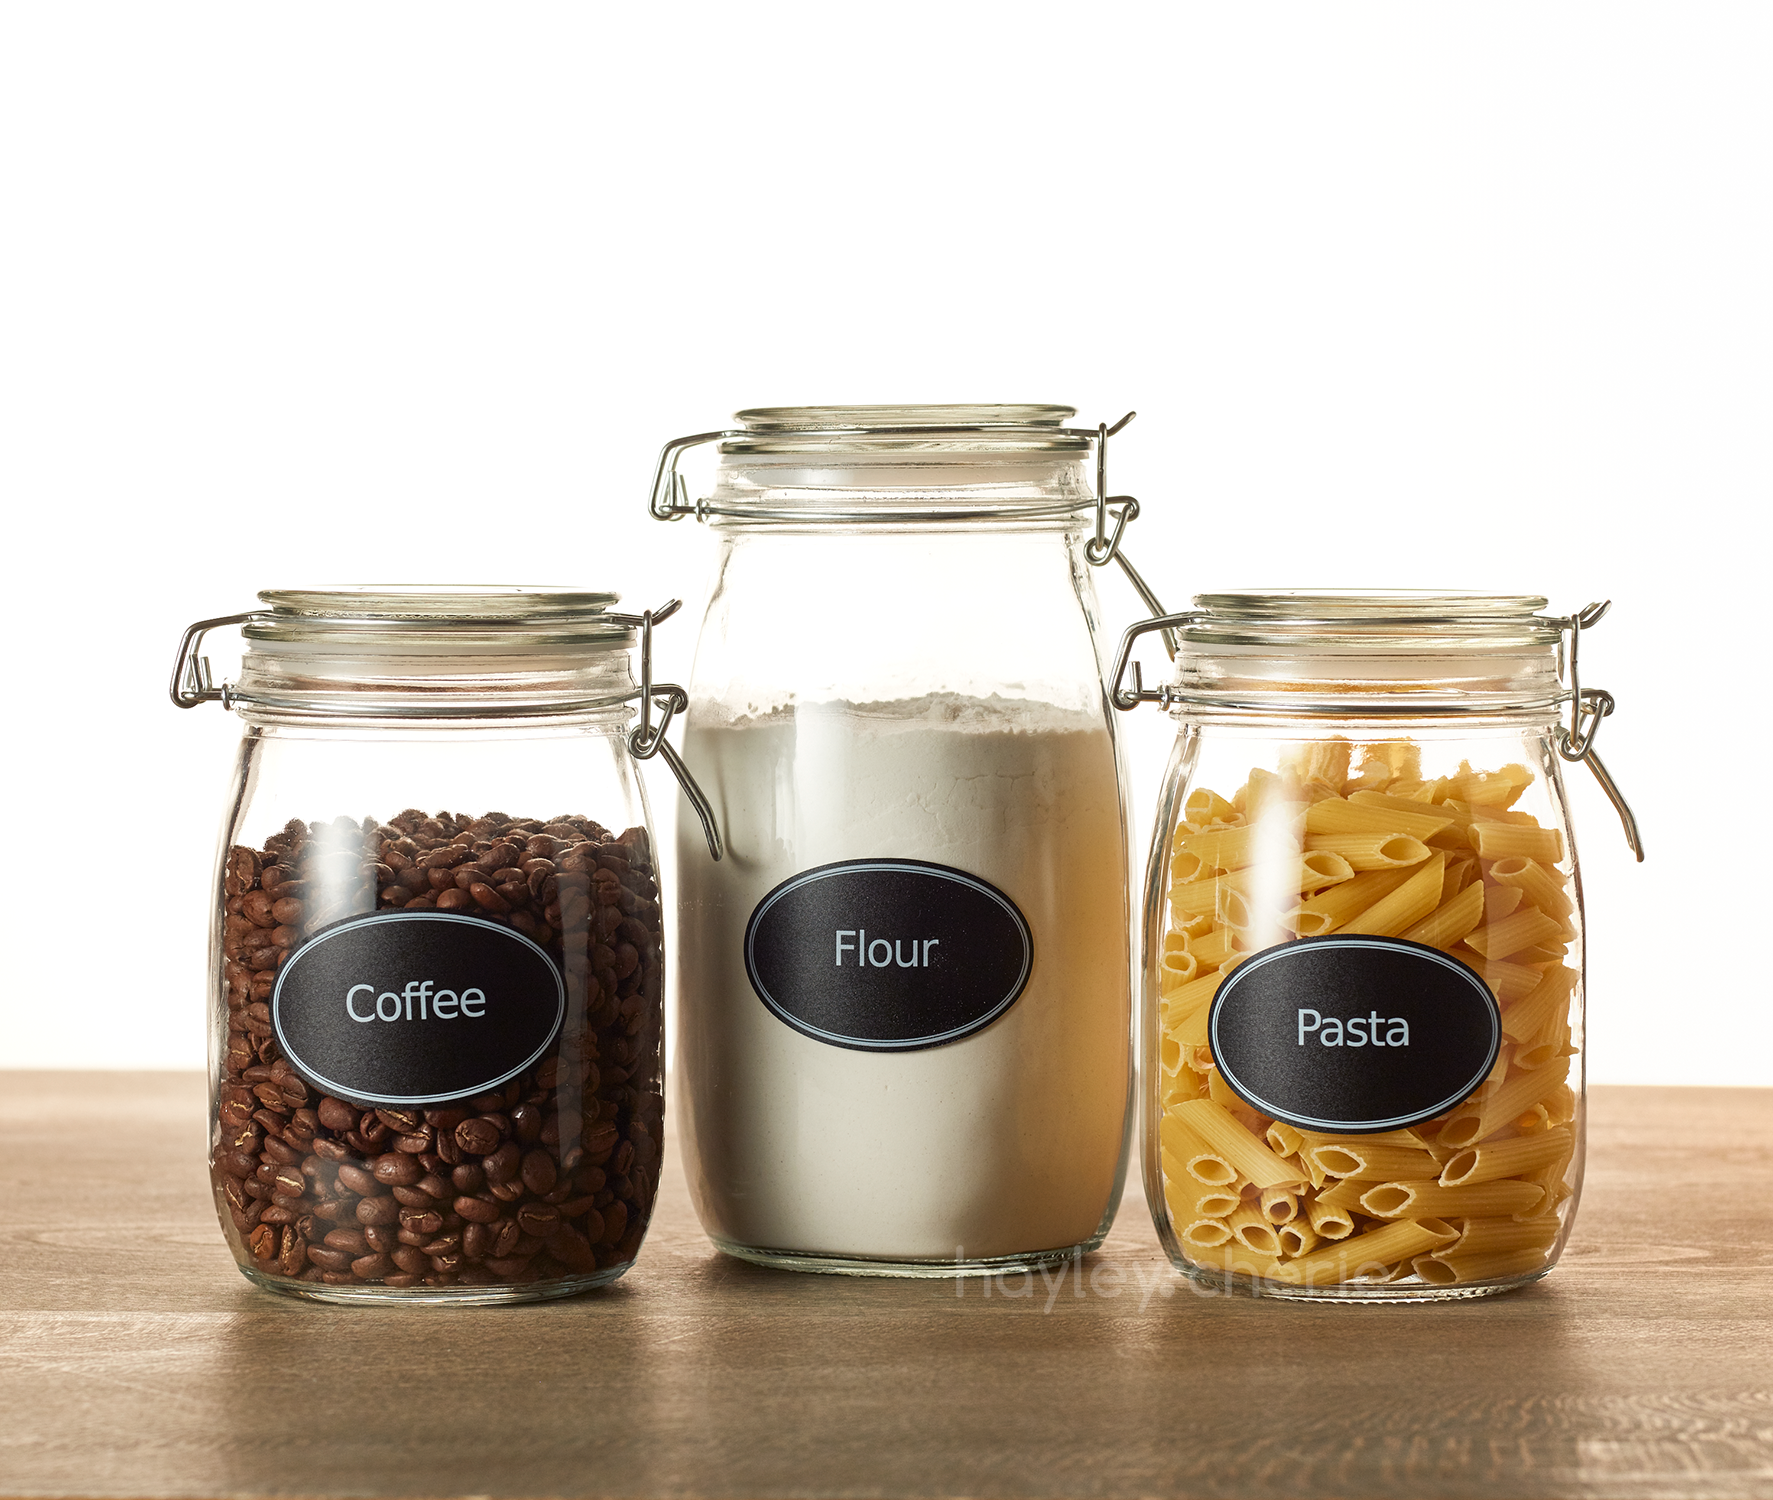 Hayley Cherie - 6 oz Large Square Glass Spice Jars (Set of 10) - Chalkboard  Labels, Stainless Steel Lids and Large & Small Shaker Inserts